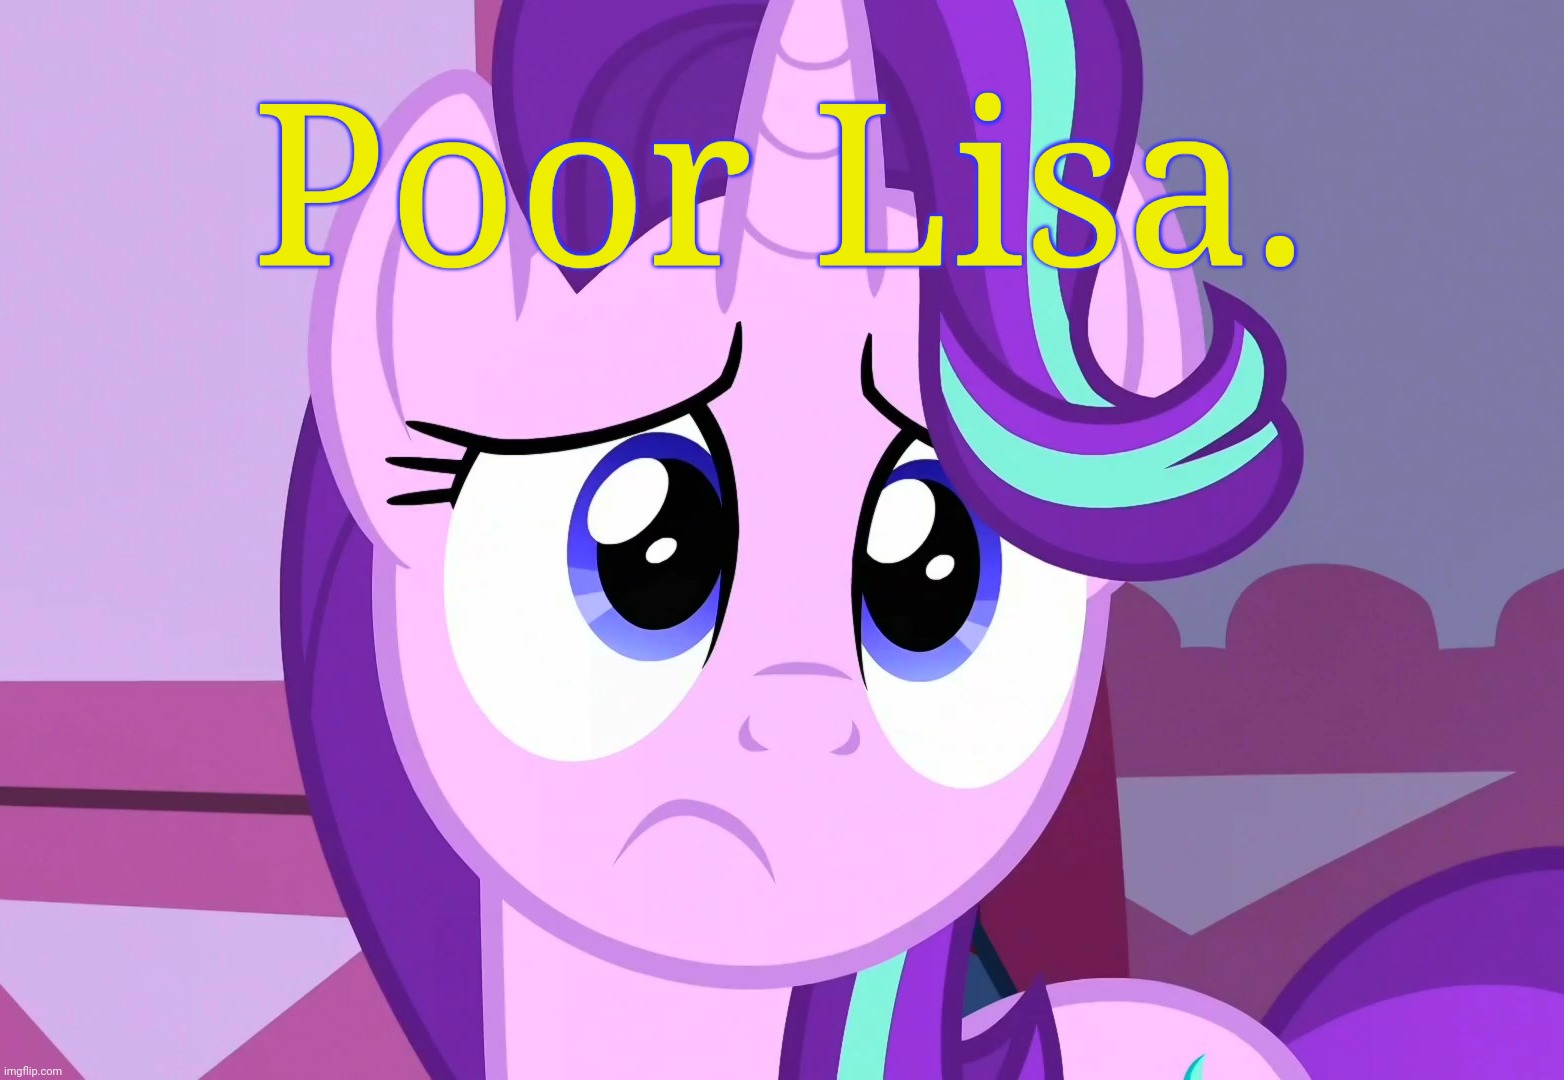 Sadlight Glimmer (MLP) | Poor Lisa. | image tagged in sadlight glimmer mlp | made w/ Imgflip meme maker